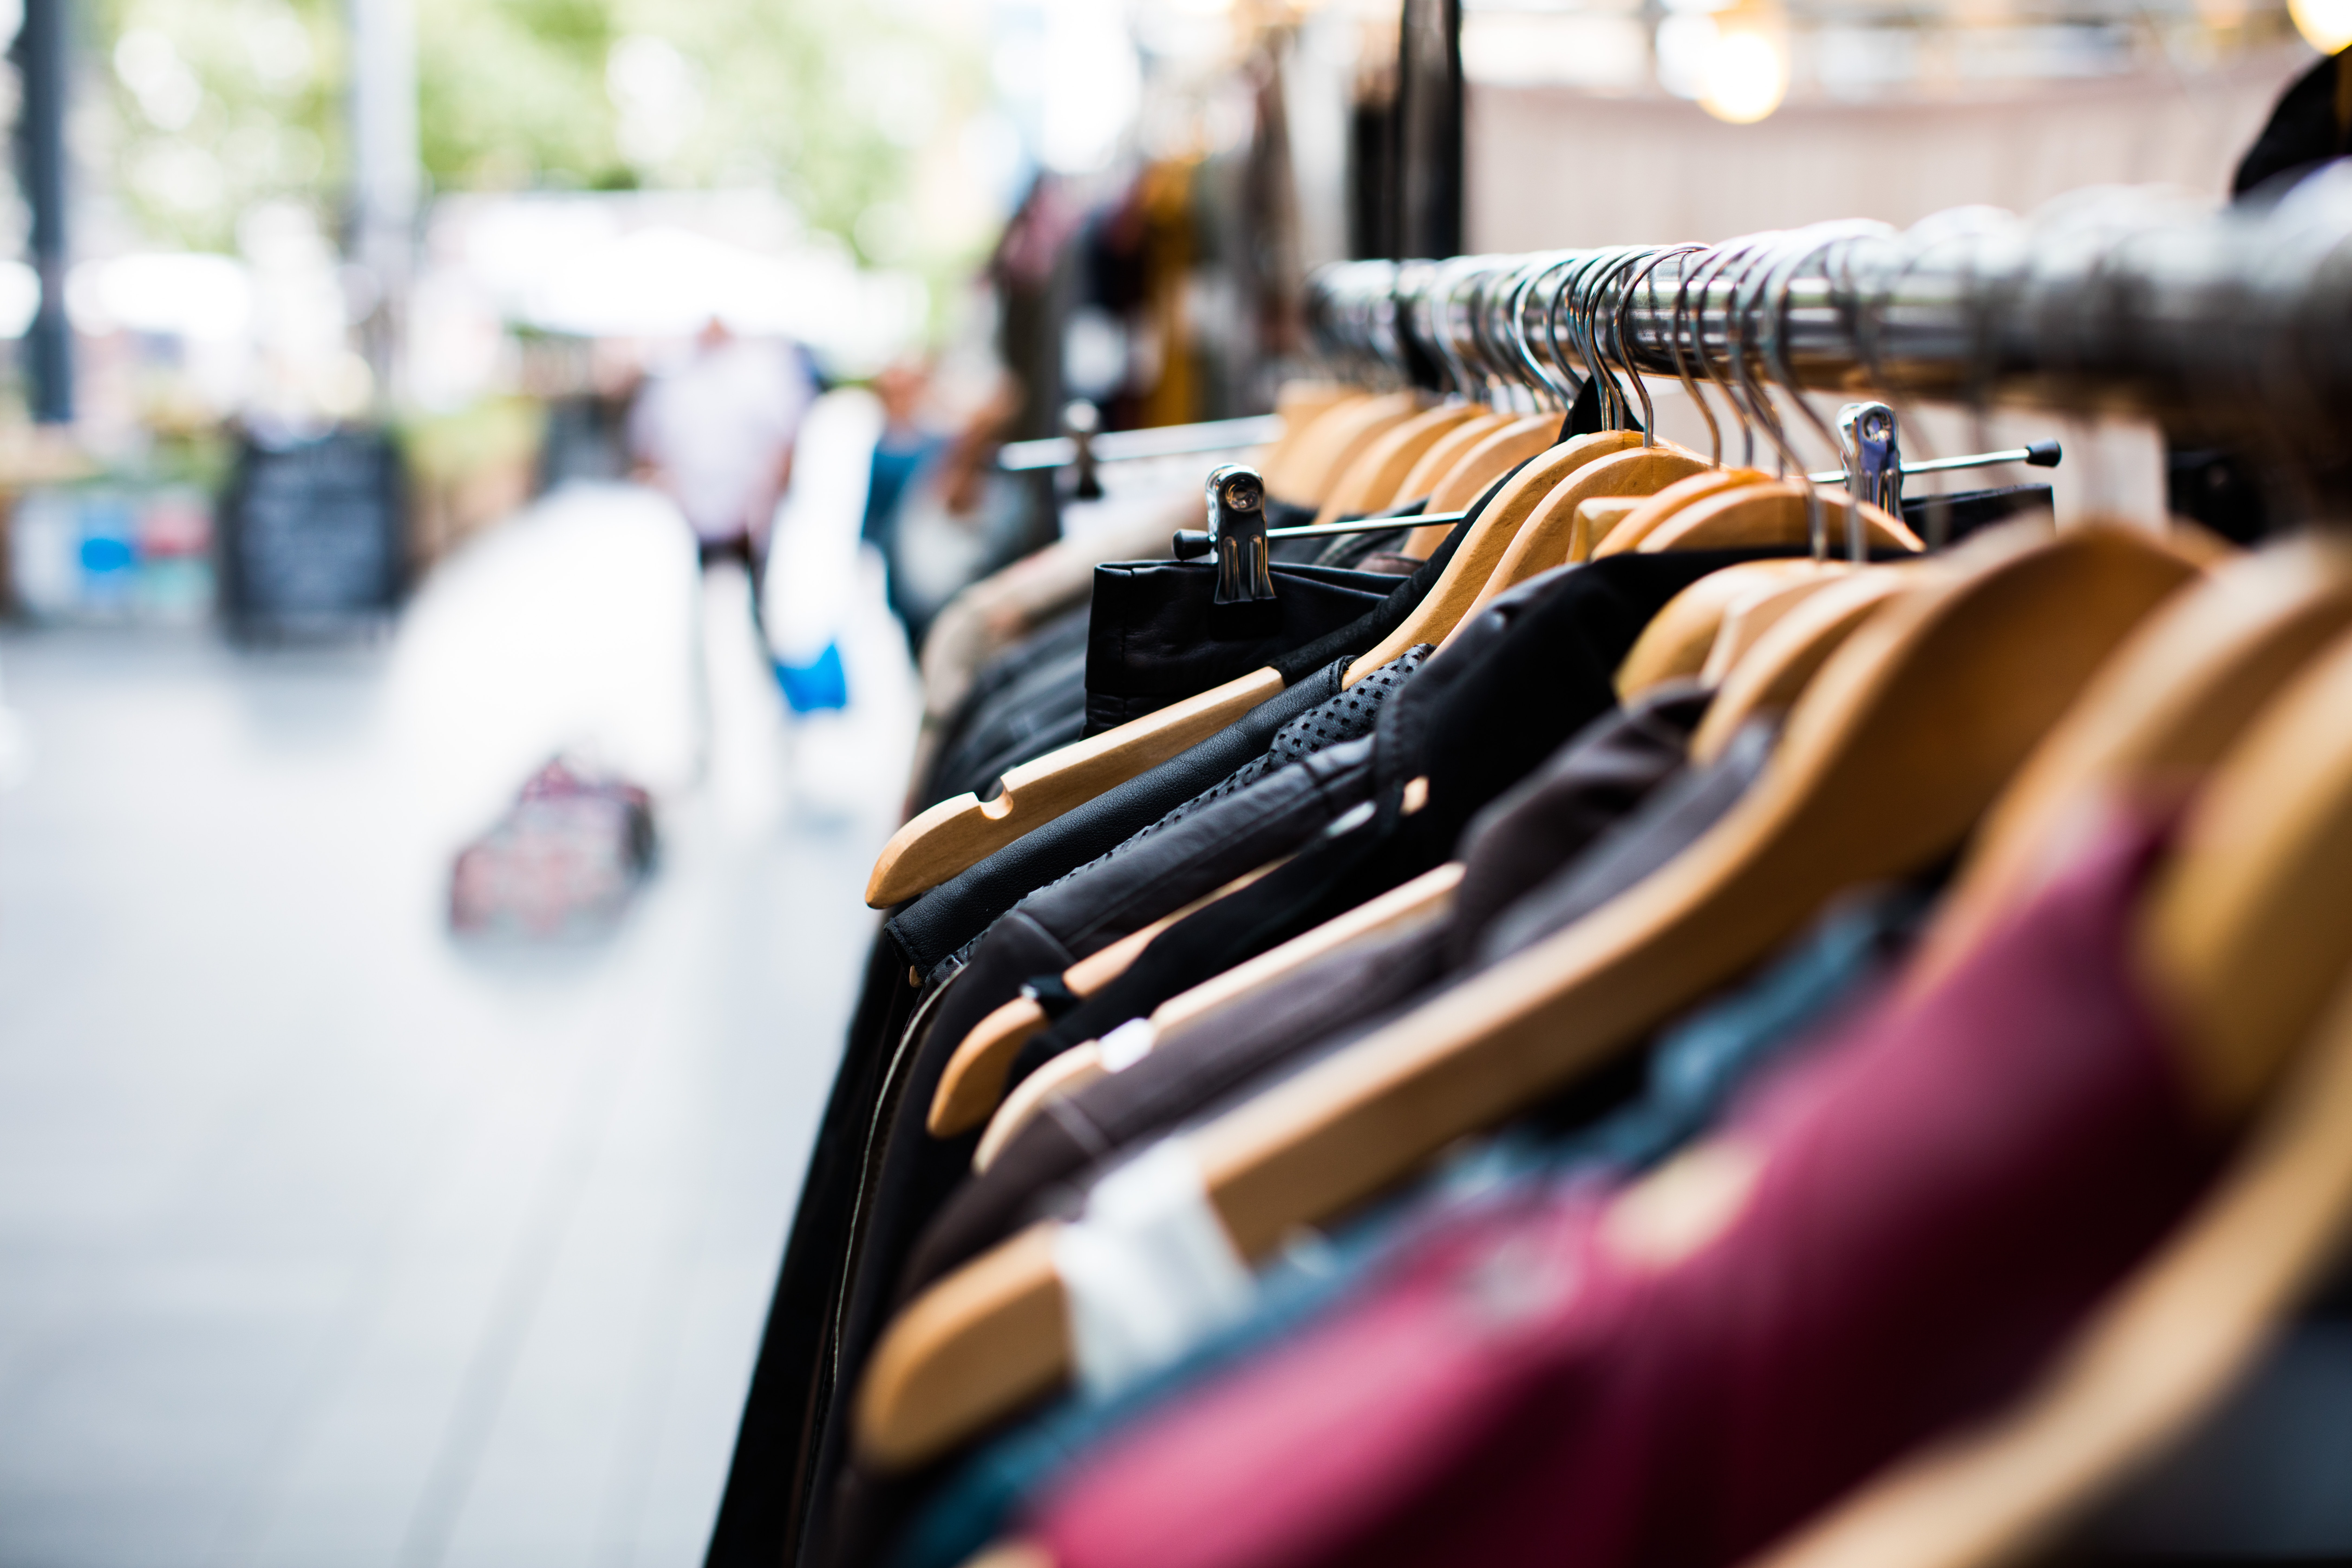 Artificial Photography photo, hangers in a clothes store (via Unsplash)